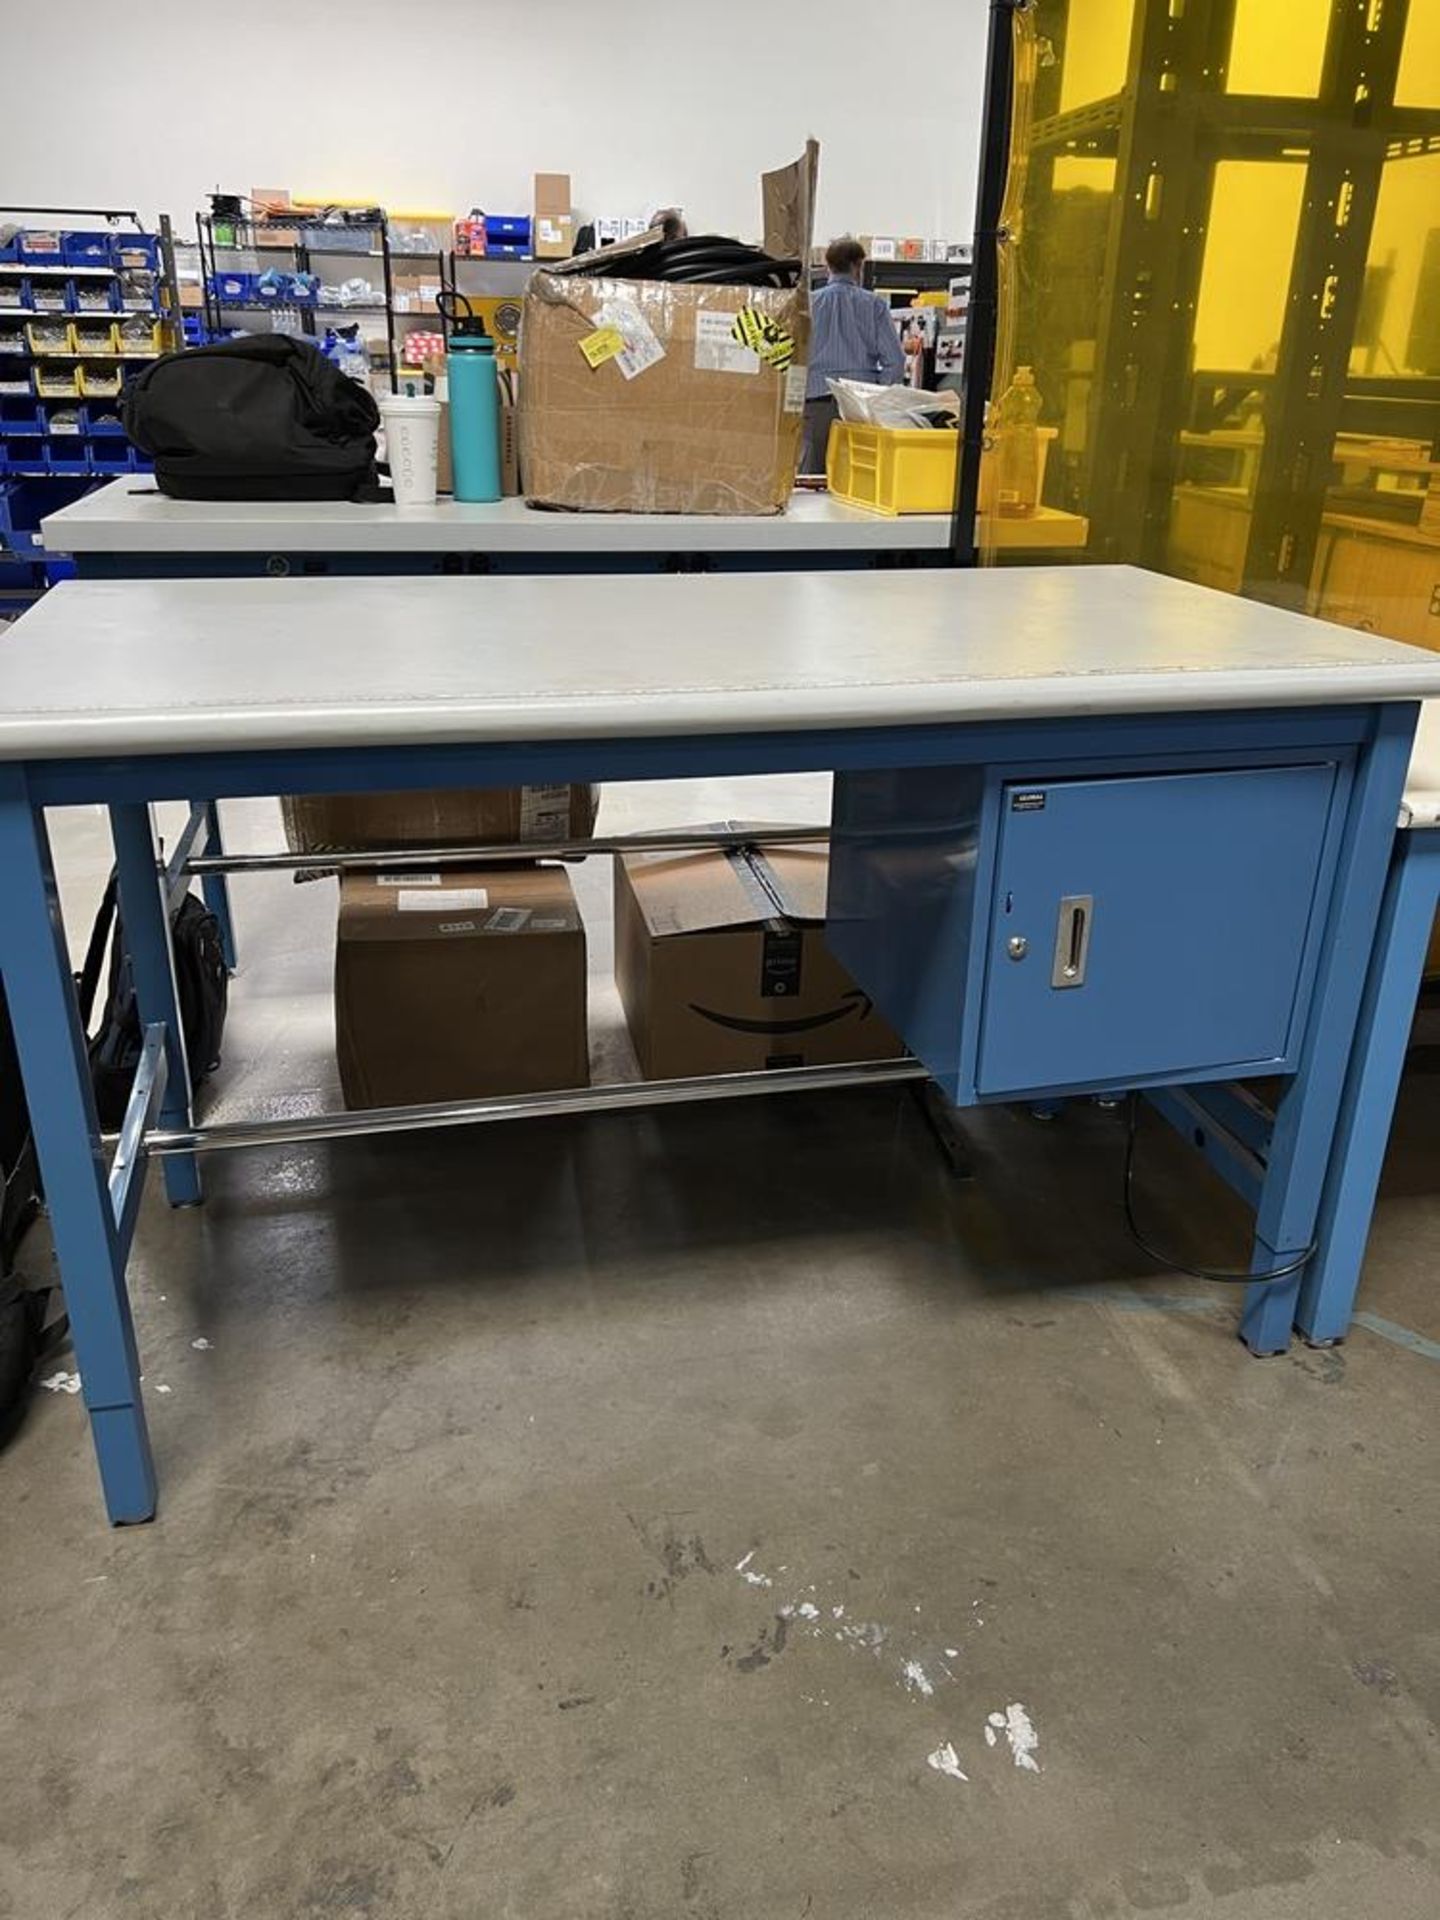 Global Industrial Adjustable Work Table With Cabinet & Power Strip 60" x 30" x 36" - Image 5 of 5